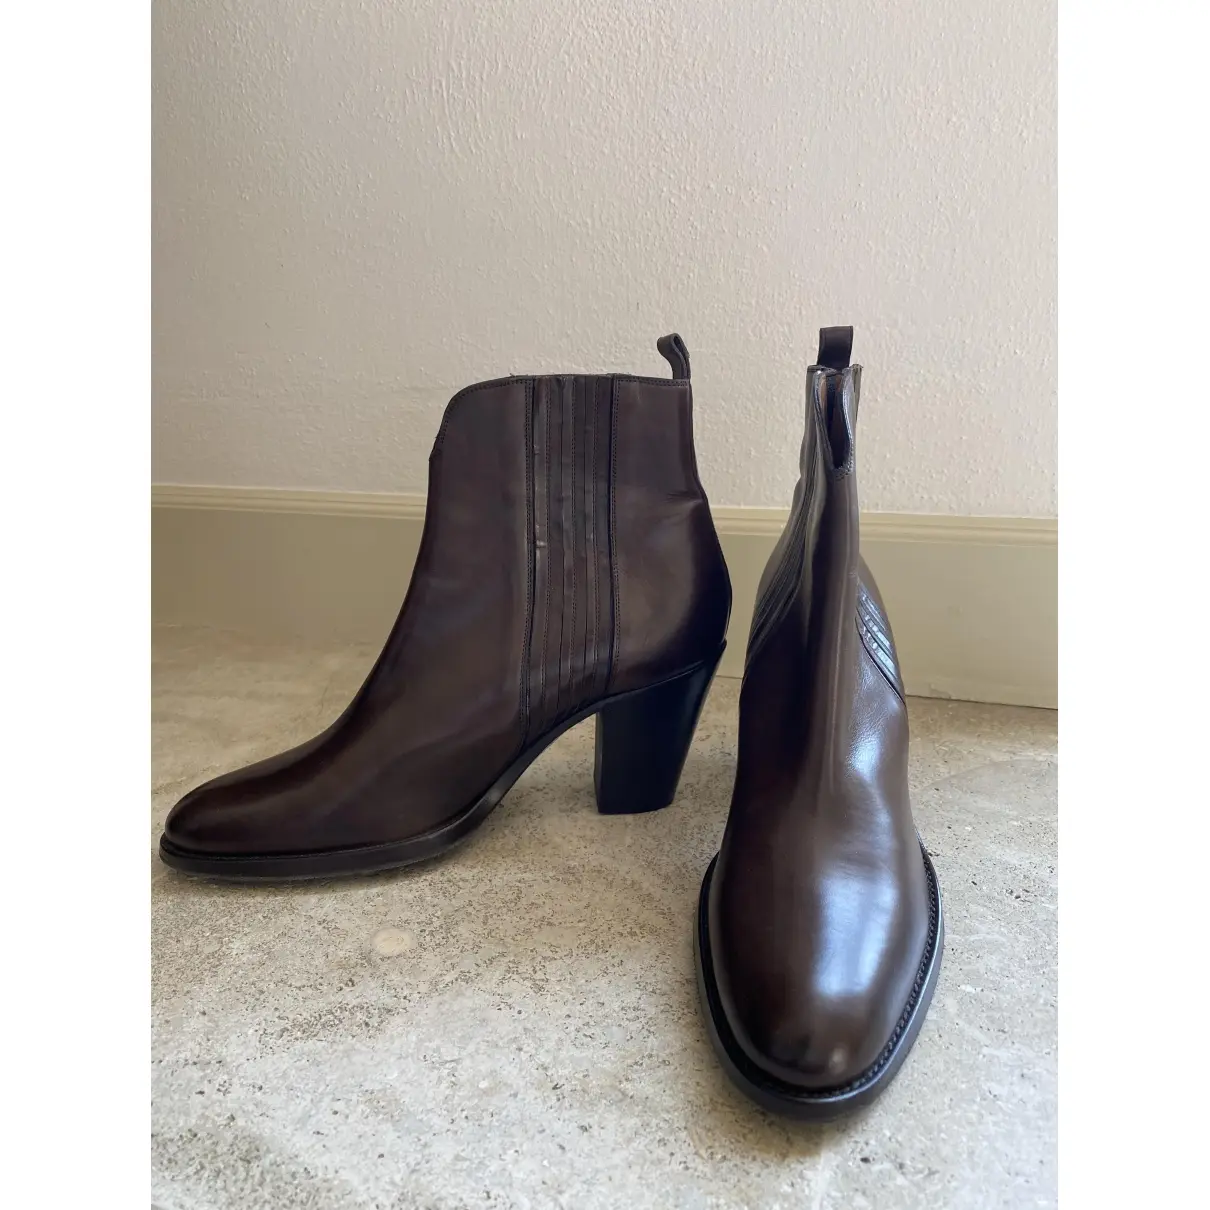 Sartore Leather boots for sale